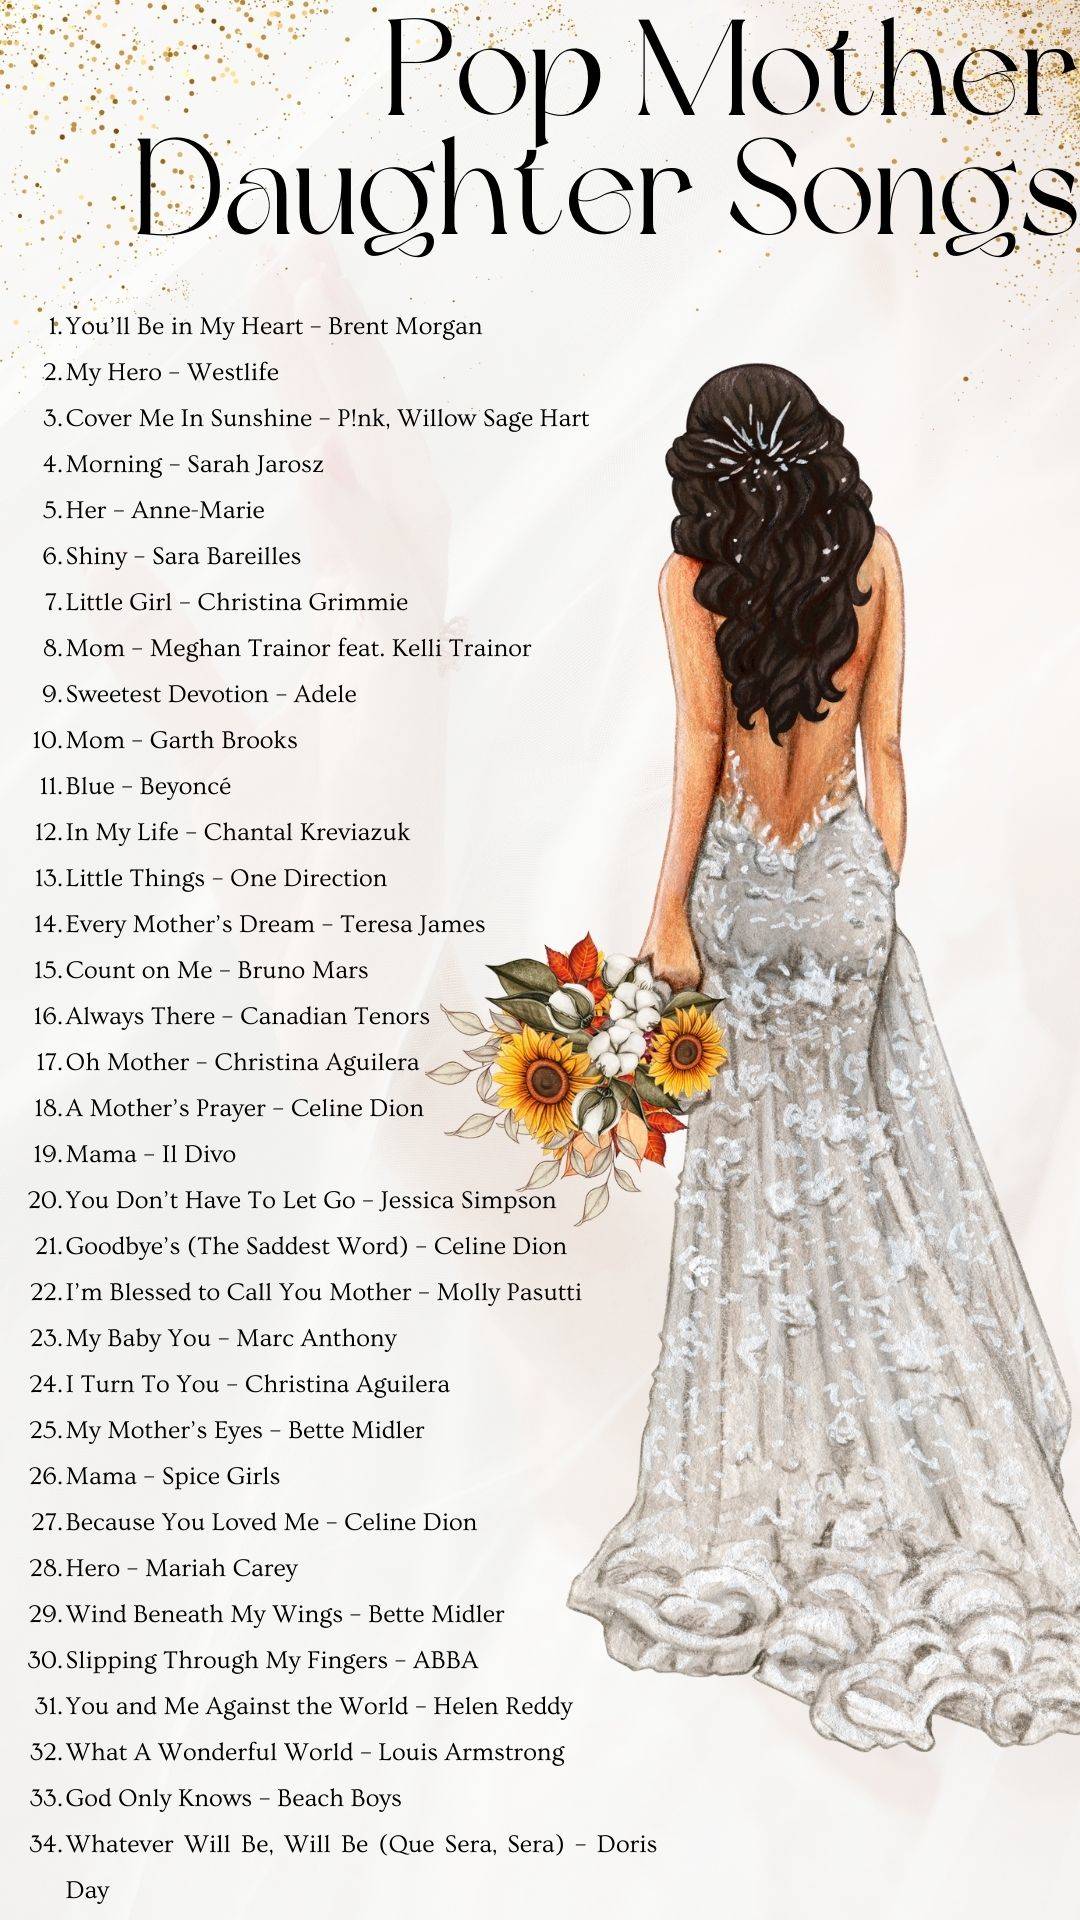 Pop Mother Daughter Songs for Wedding